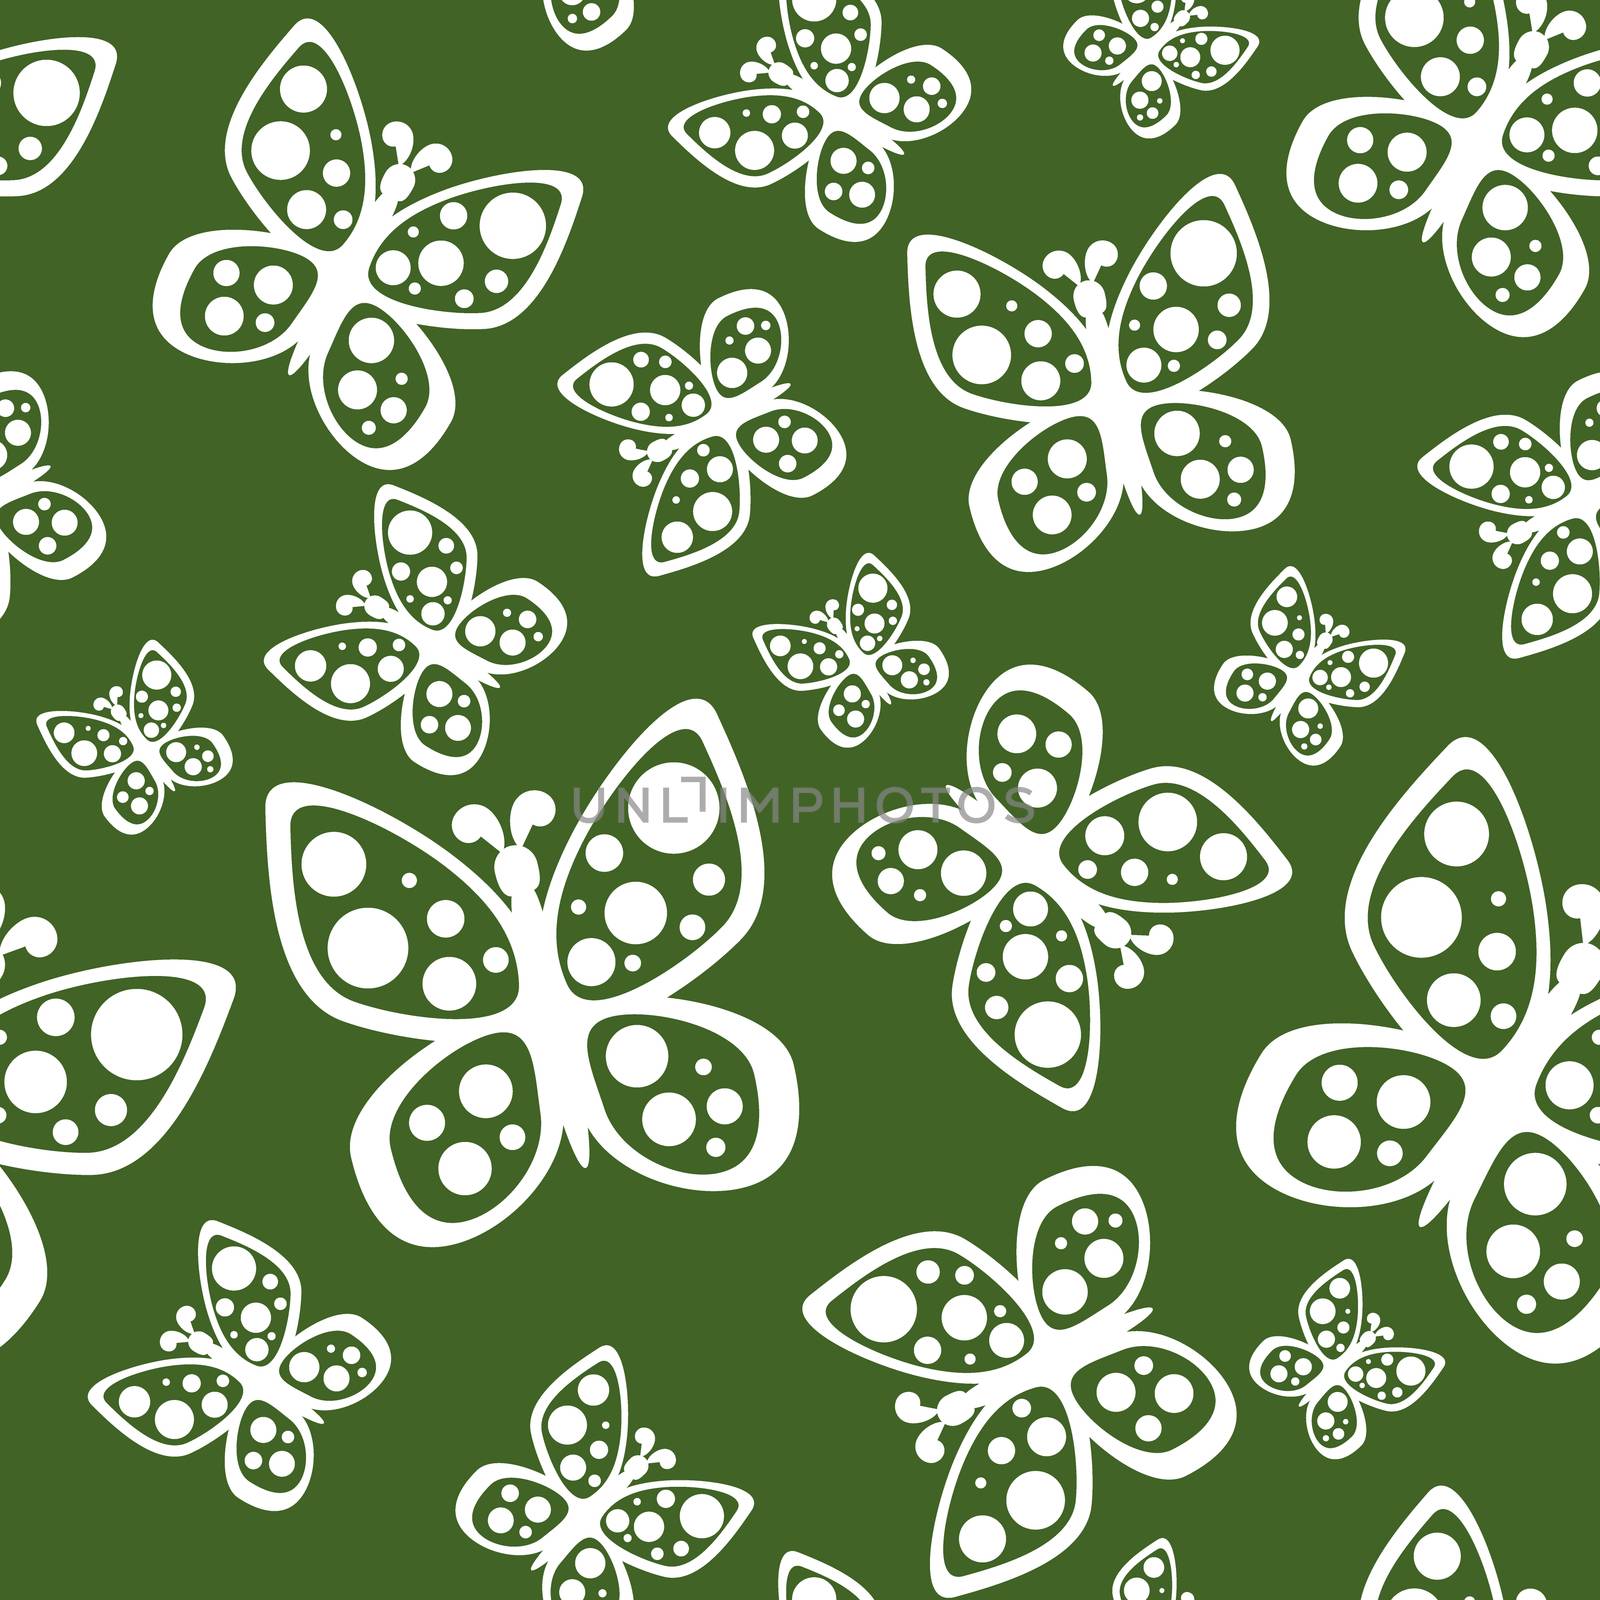 Beautiful seamless butterflies pattern in green and white colors. by Asnia